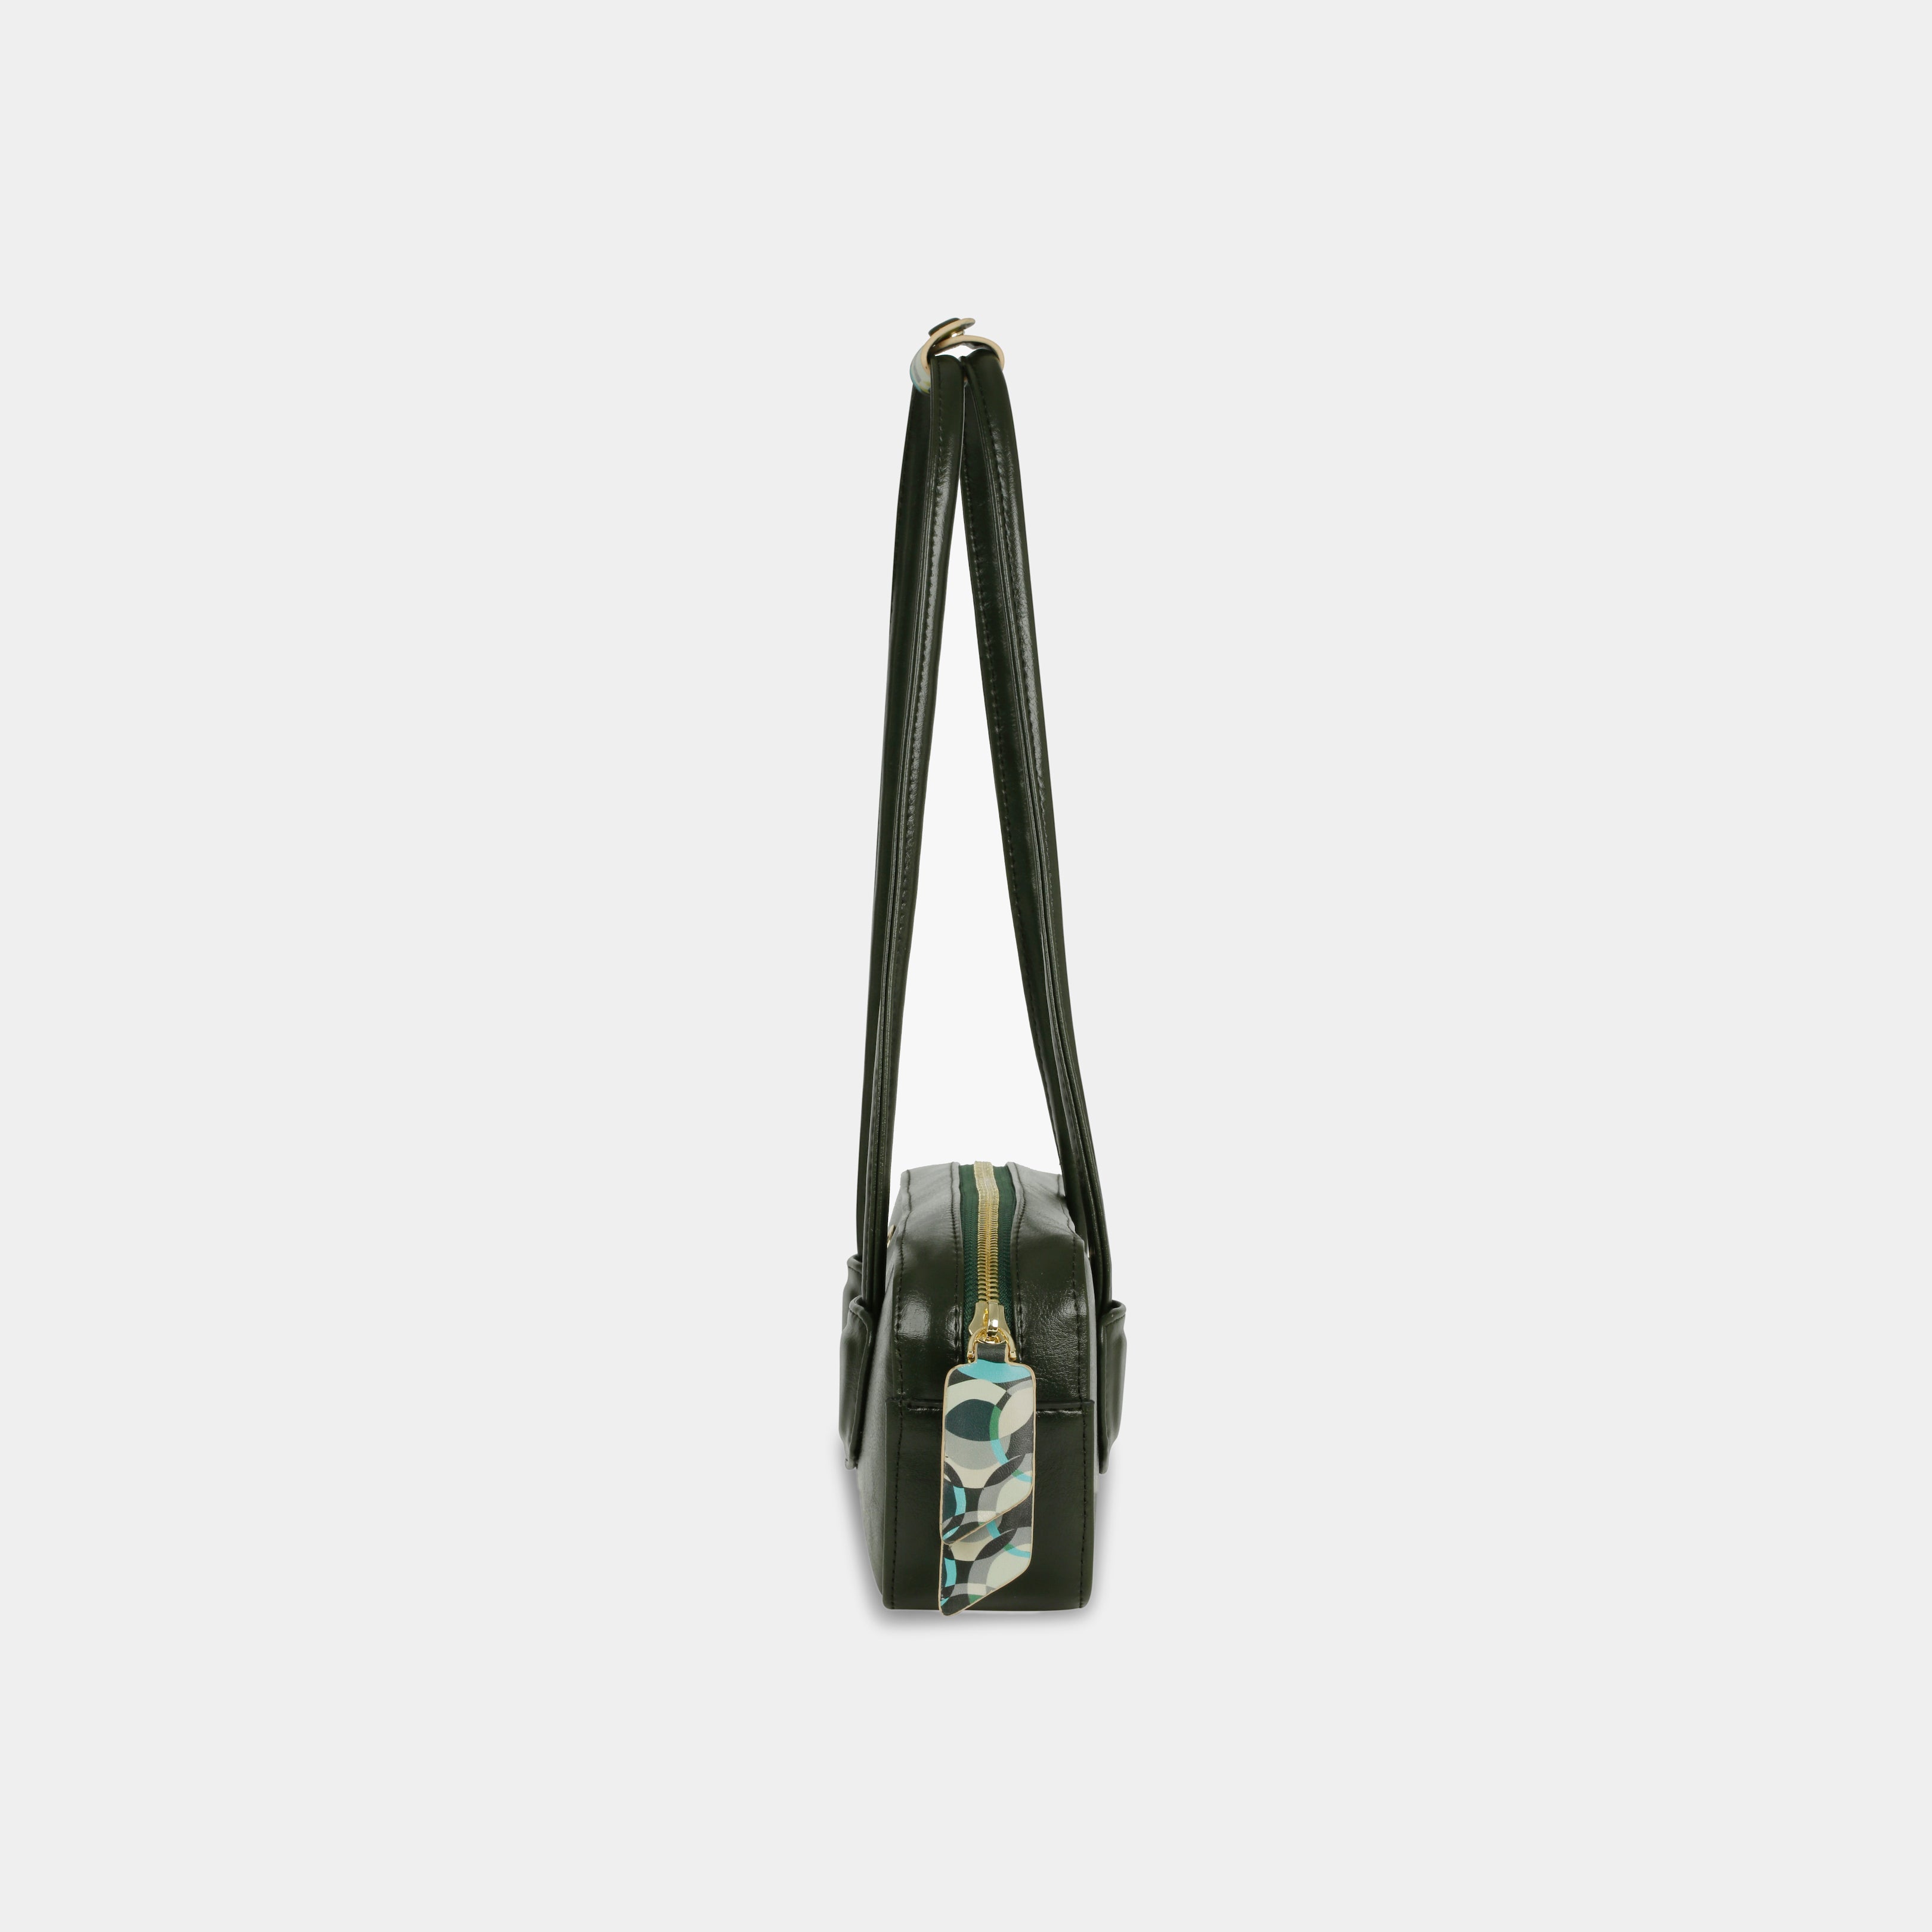 BREAKING bag in green and black color